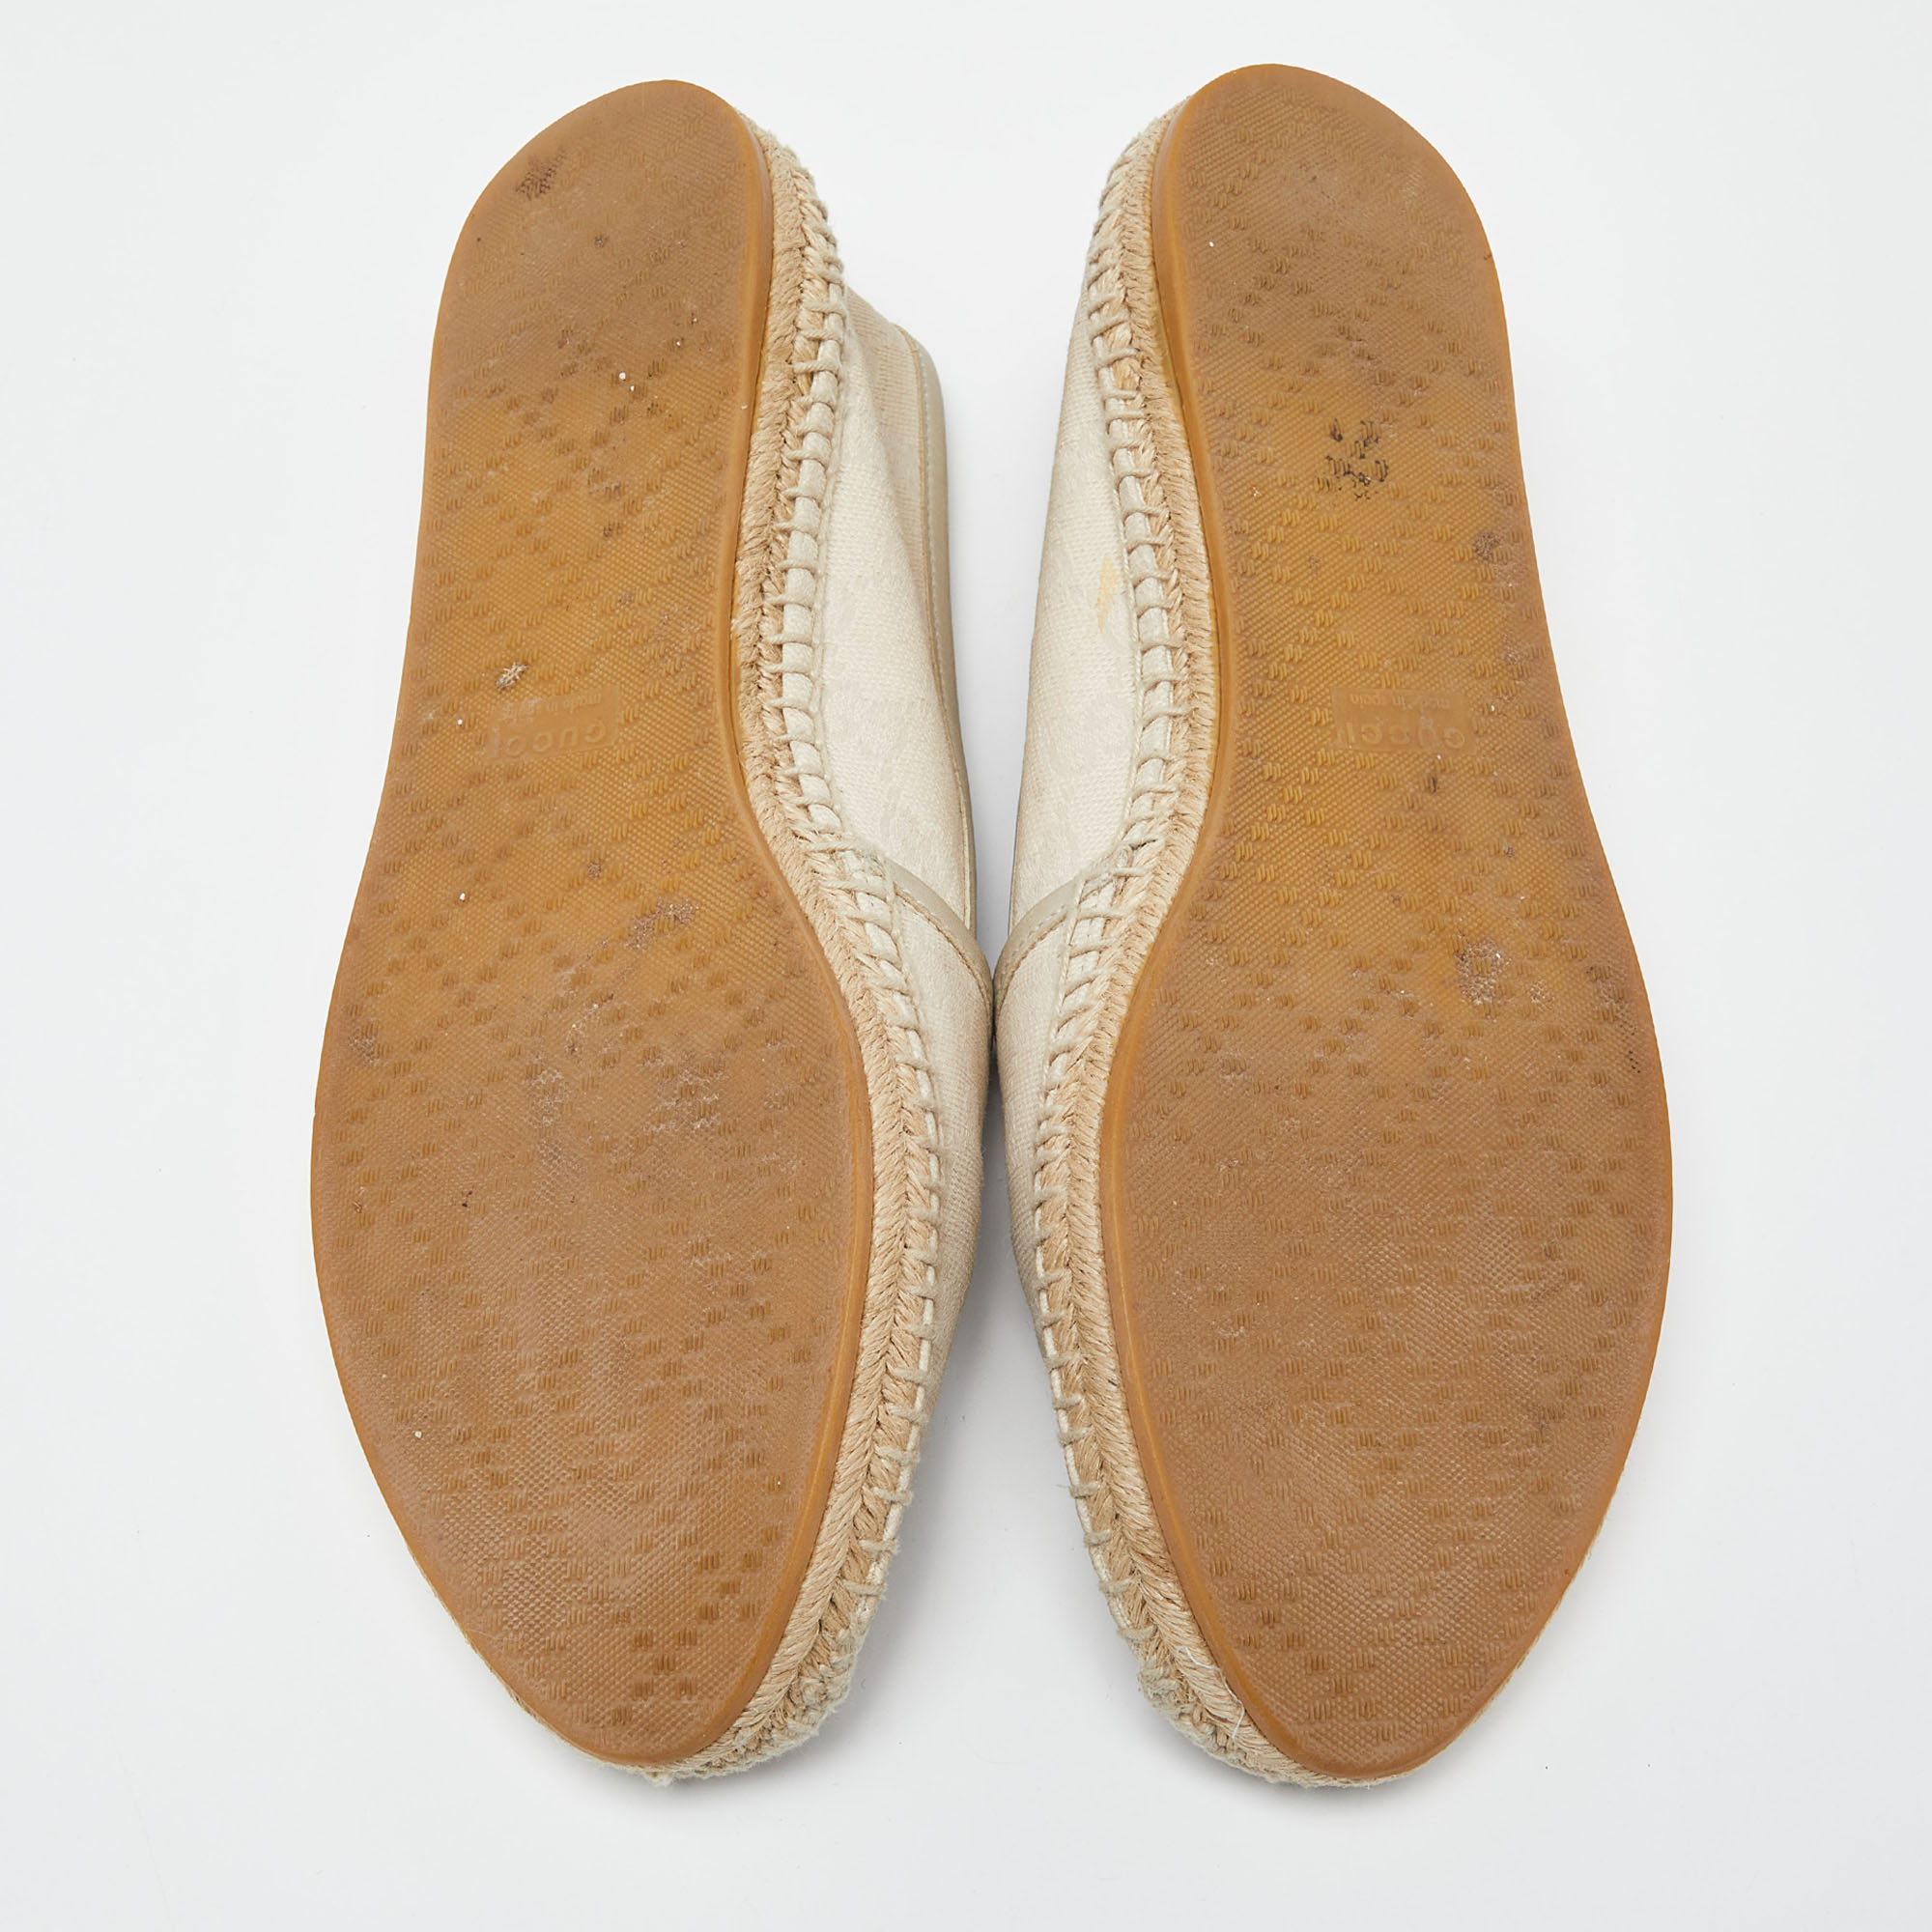 Gucci Beige GG Canvas And Leather Espadrille Flats Size 39